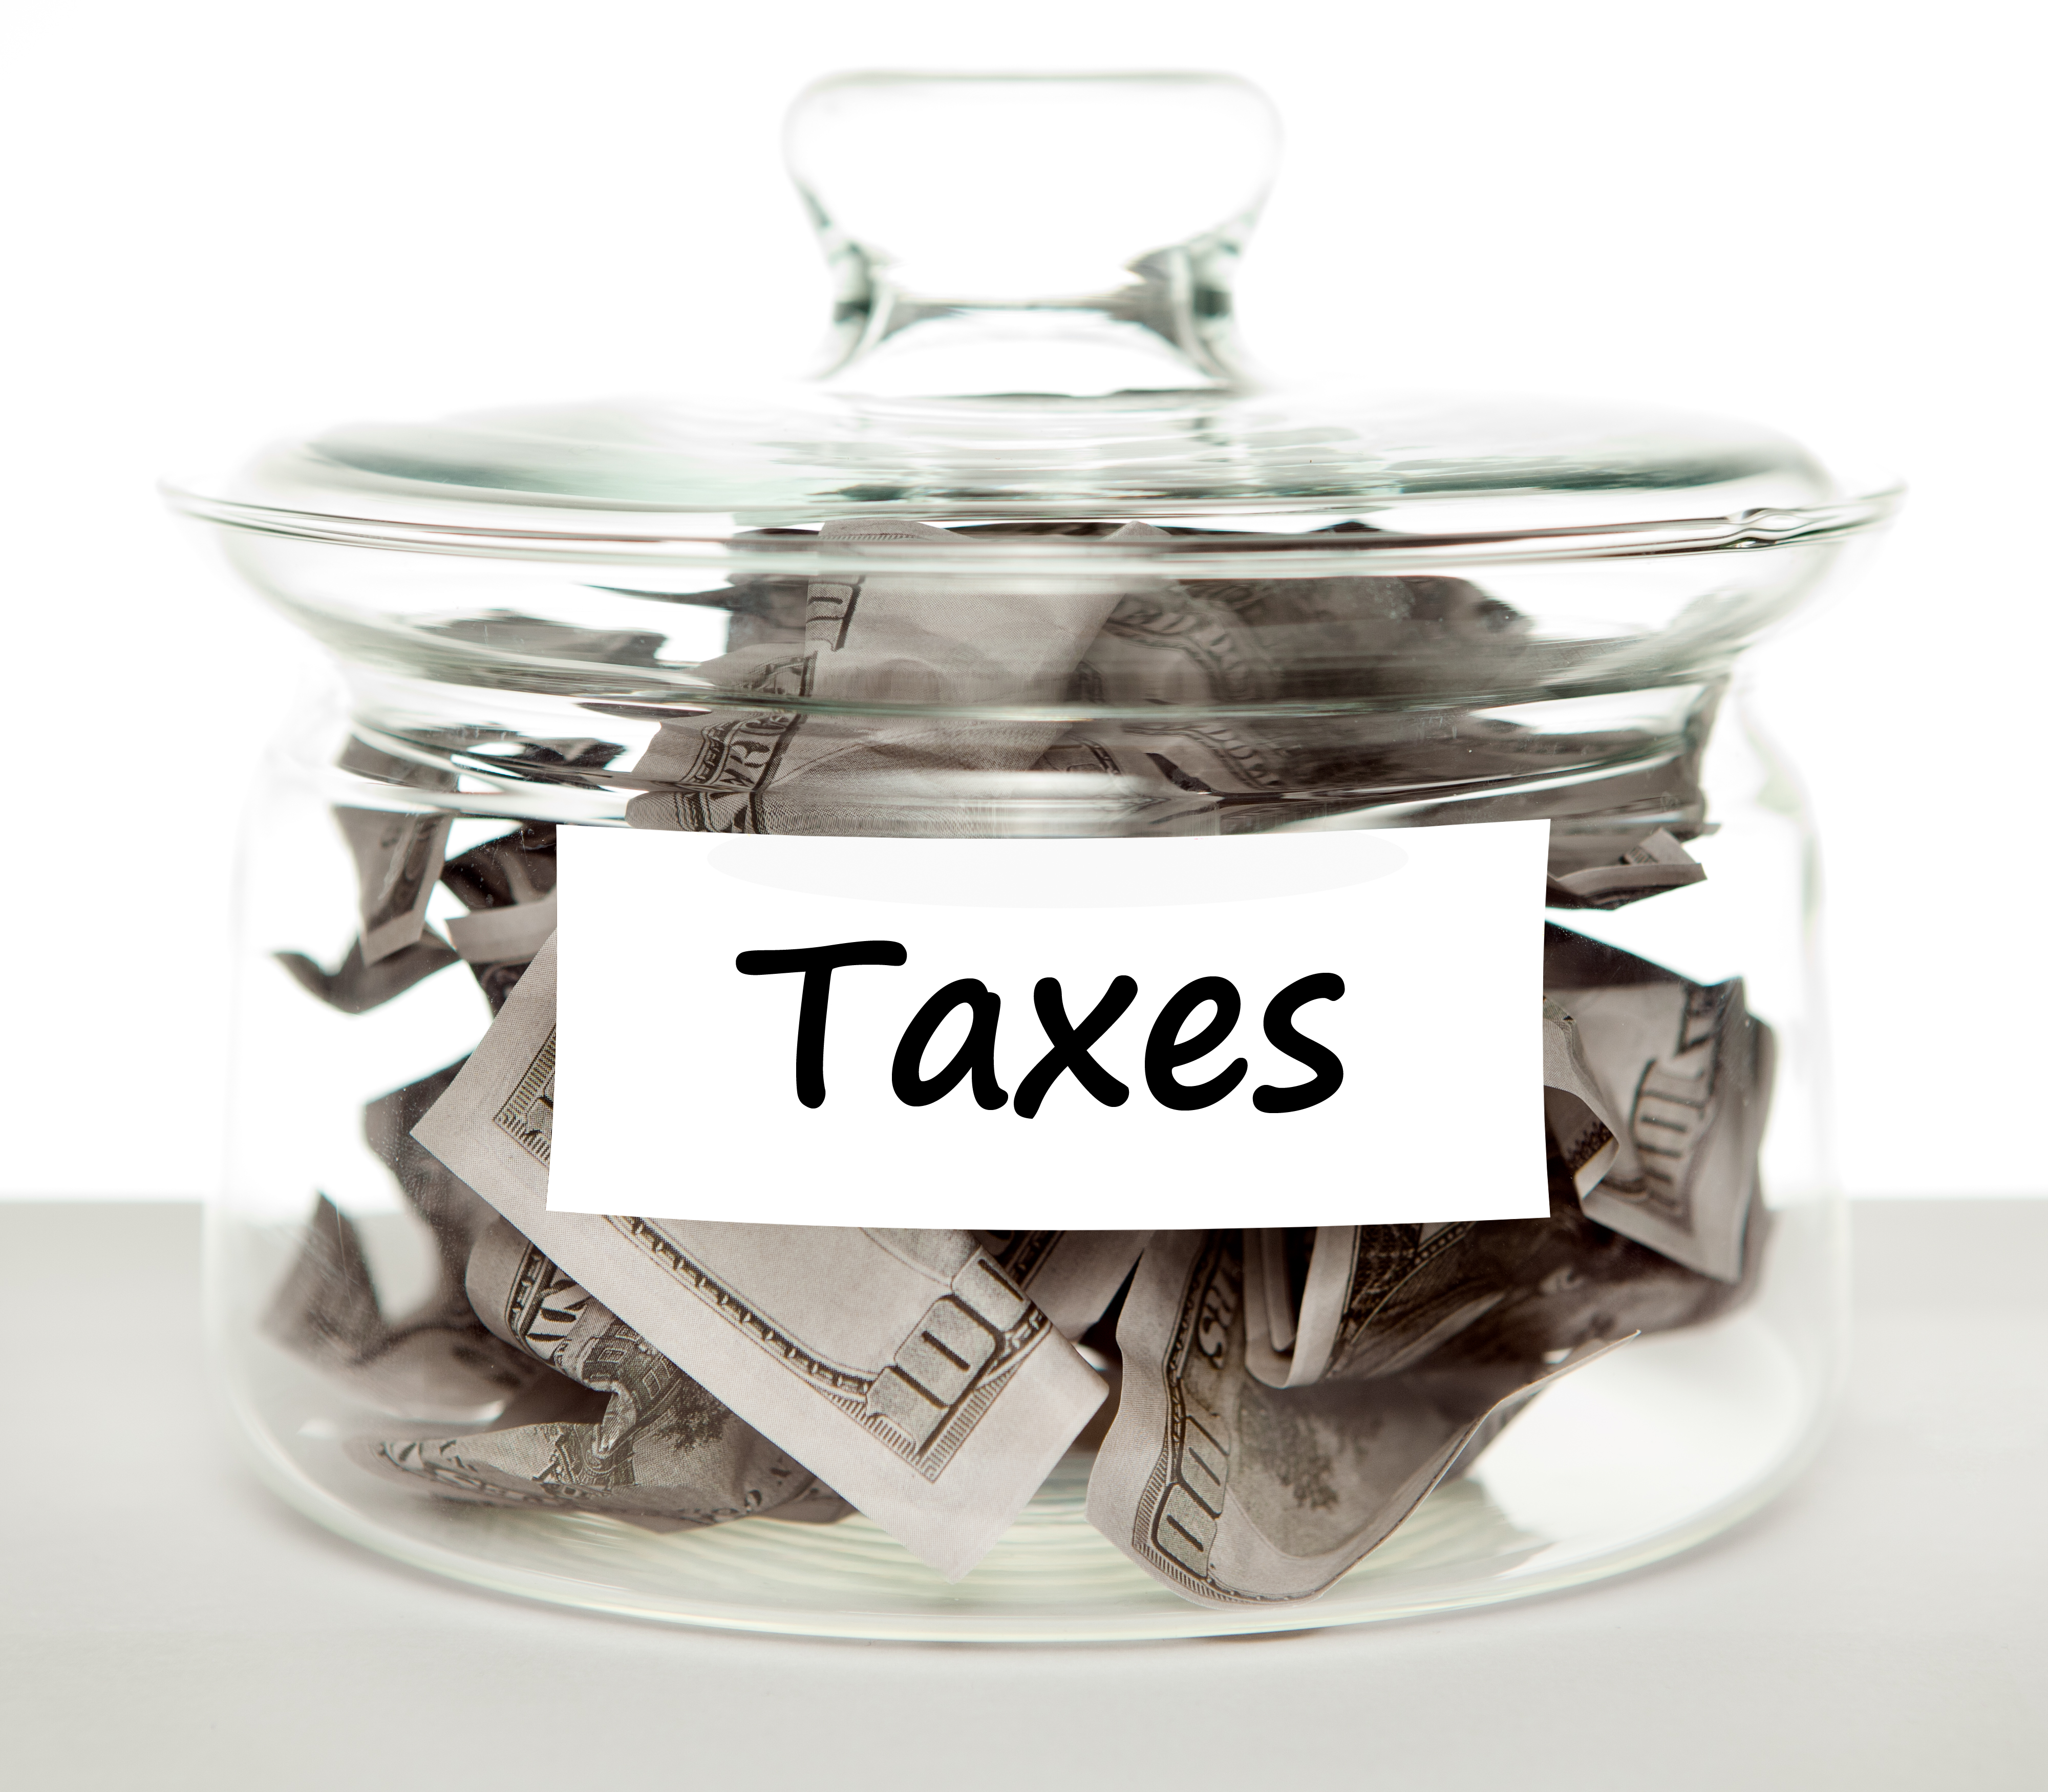 Discover the Hidden Costs of Doing Your Own Taxes – Here are the 5 Common Mistakes